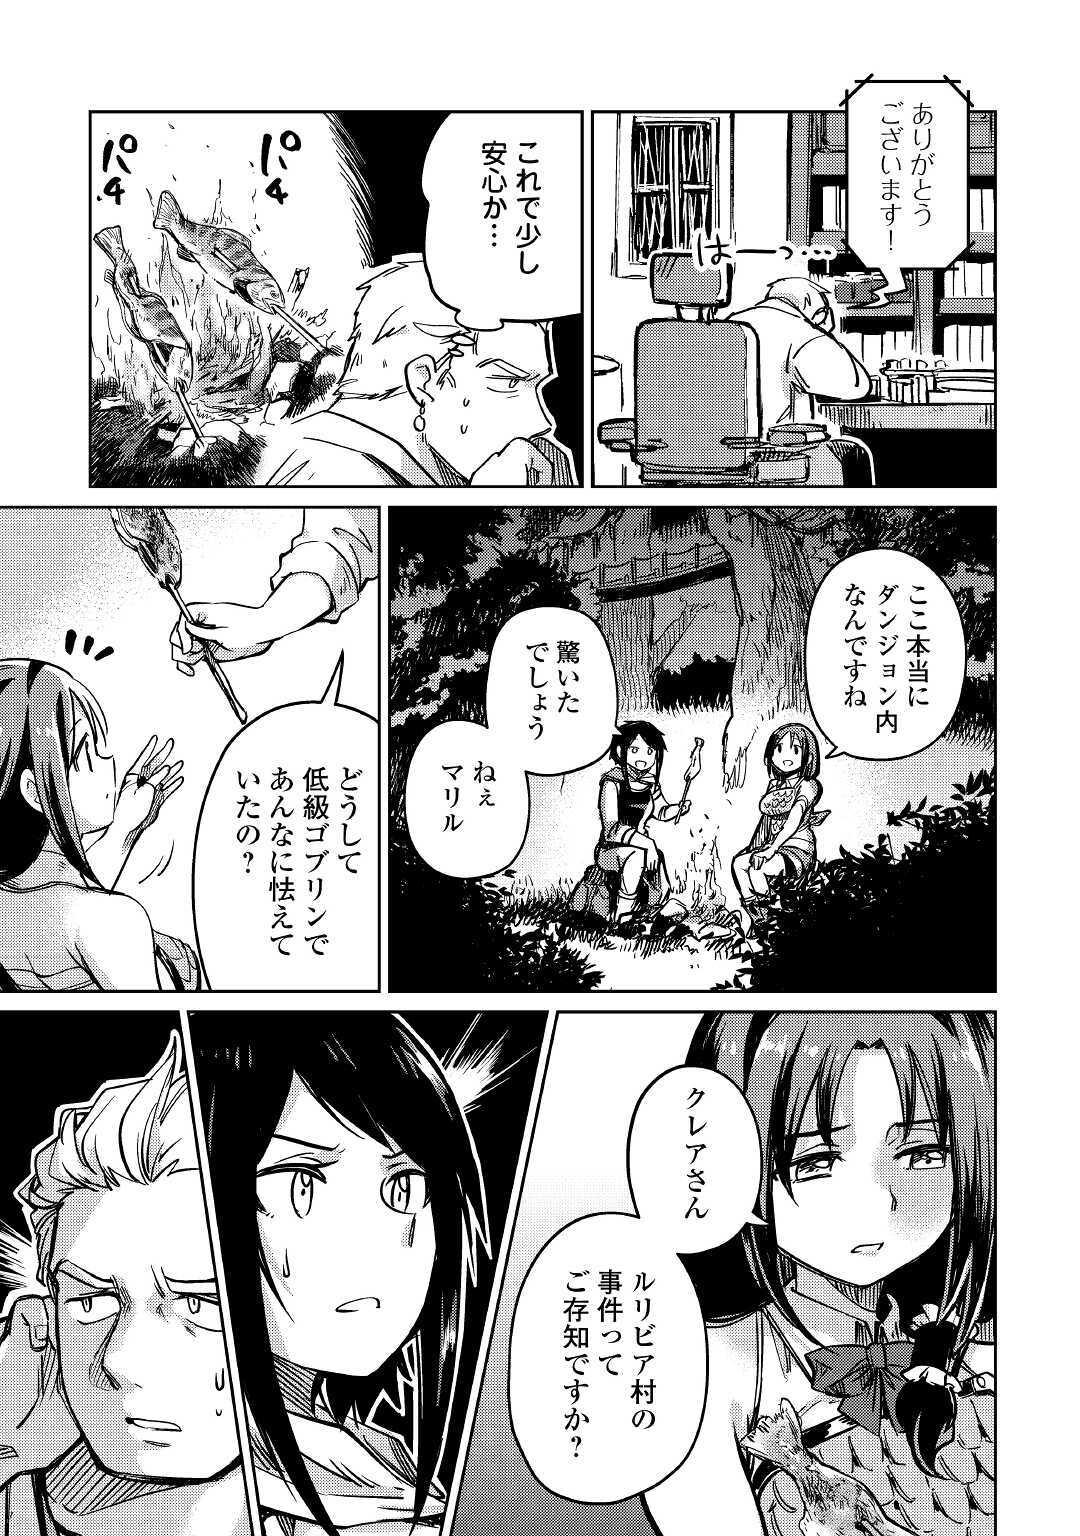 The Former Structural Researcher’s Story of Otherworldly Adventure 第26話 - Page 17